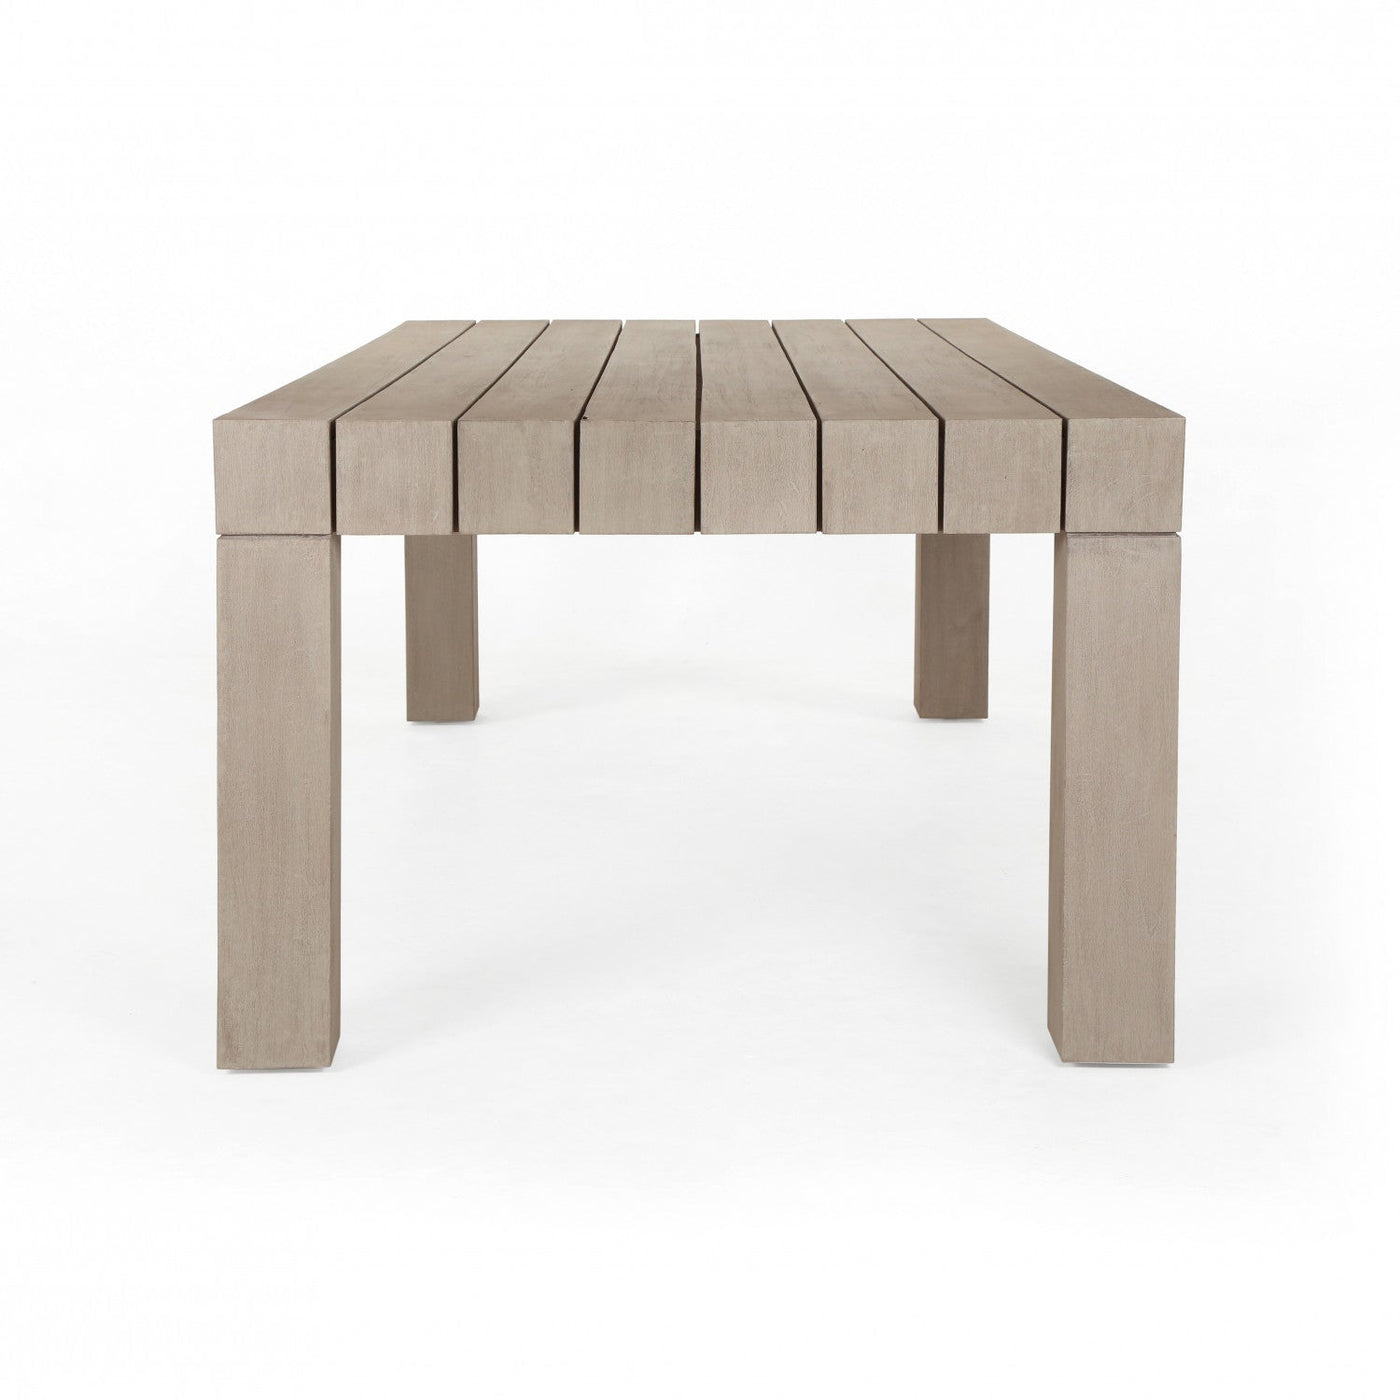 SONORA OUTDOOR DINING TABLE